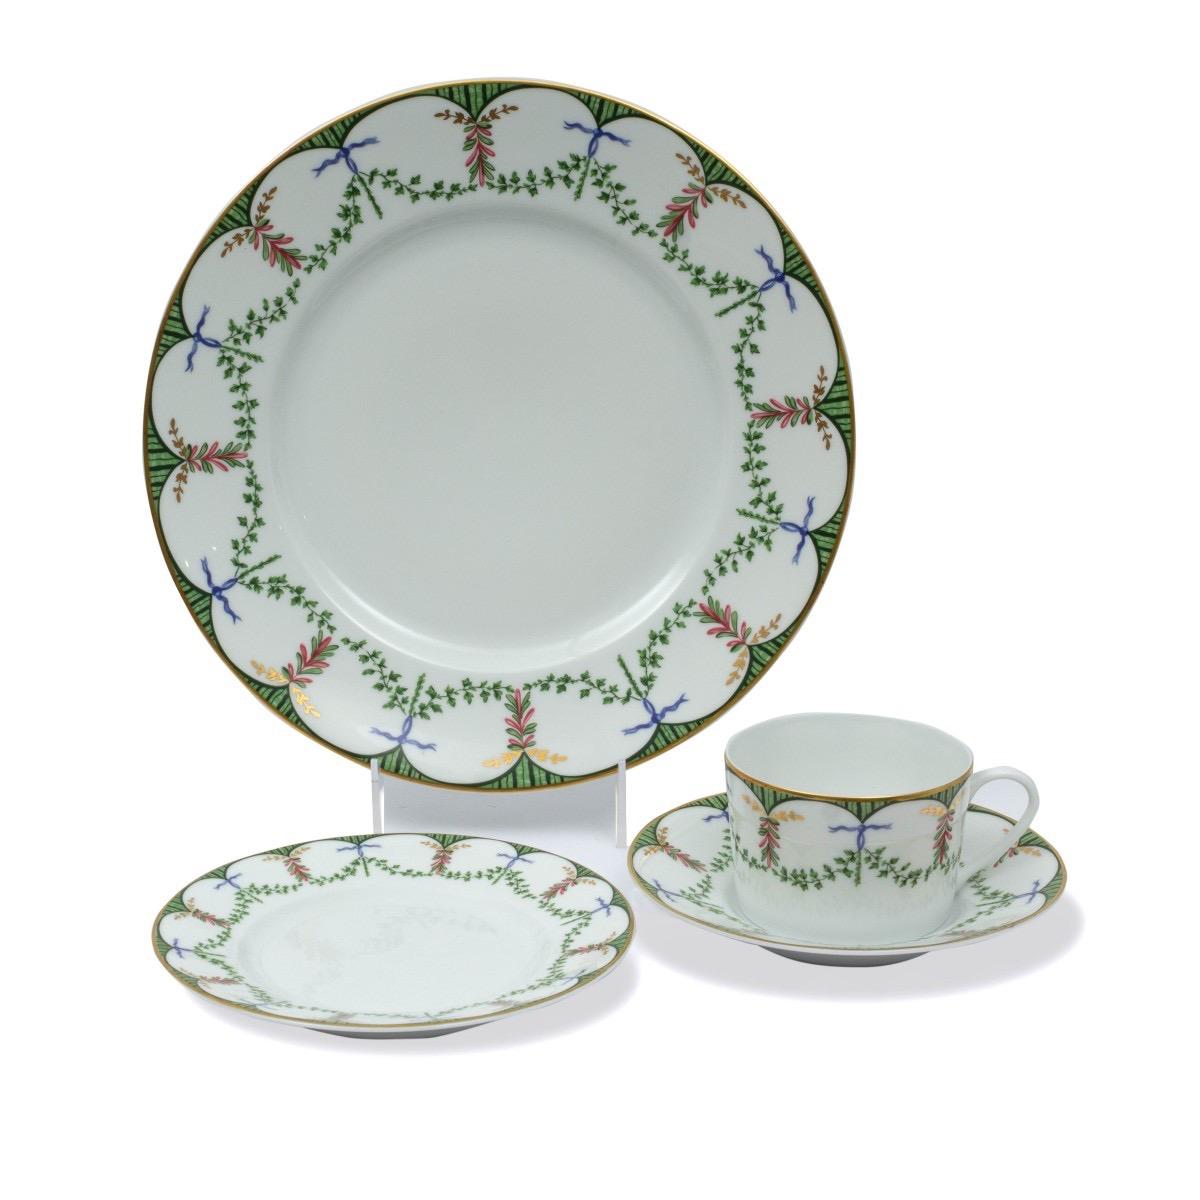 A set of 12 place settings in the Festivites pattern by Raynaud. This pattern is currently discontinued, made in Limoges, France from 1986-2013.

Includes the following pieces (a total of 48):
12 dinner plate - 10.75